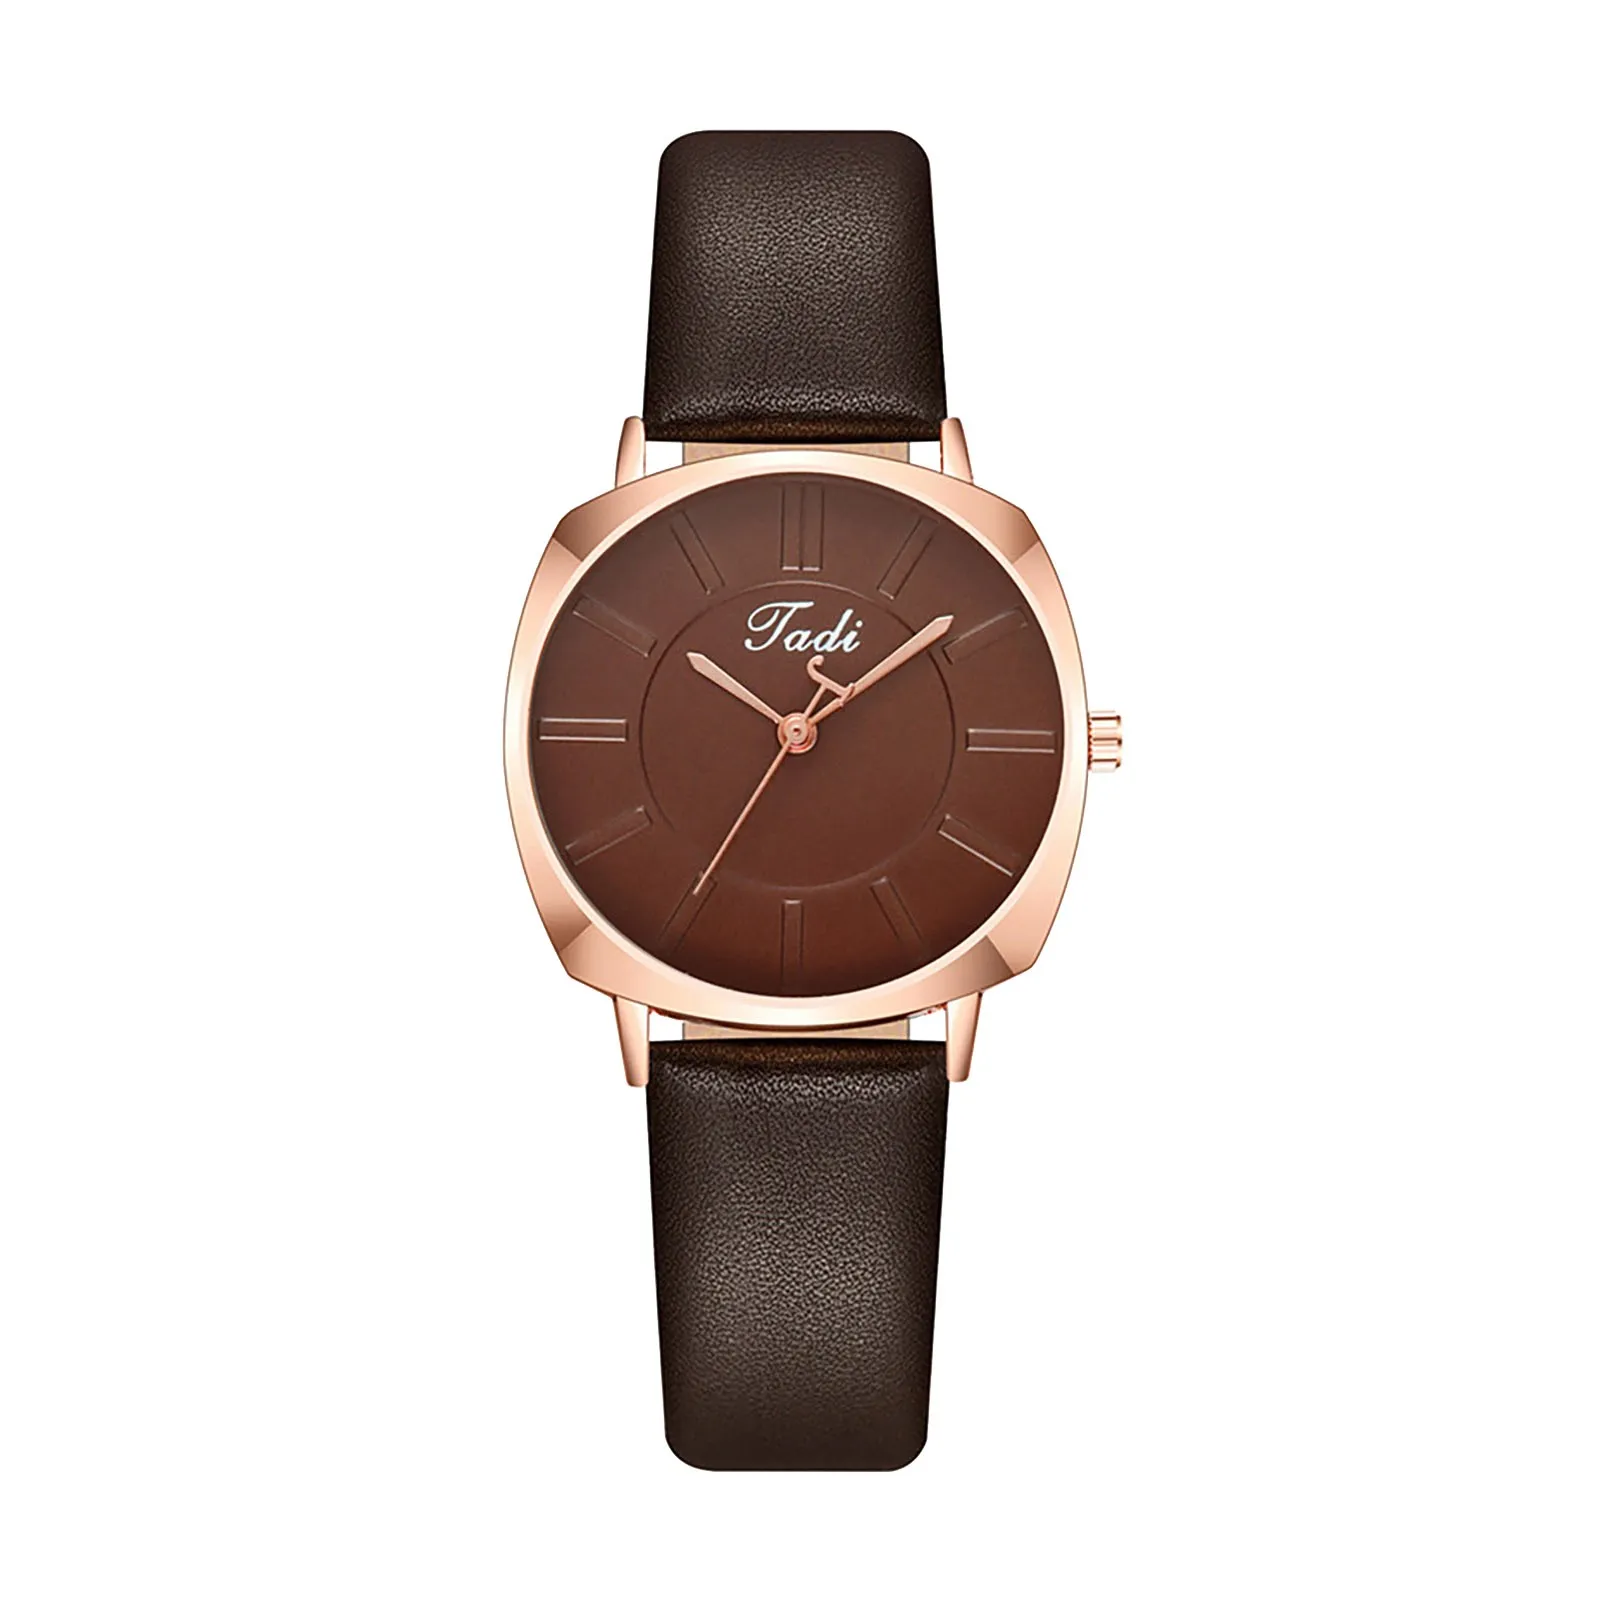 

Fashion Watches For Women Simple Ladies Analog Quartz Digital Watches Casual Round Dial Leather Strap Wristwatches Reloj Mujer